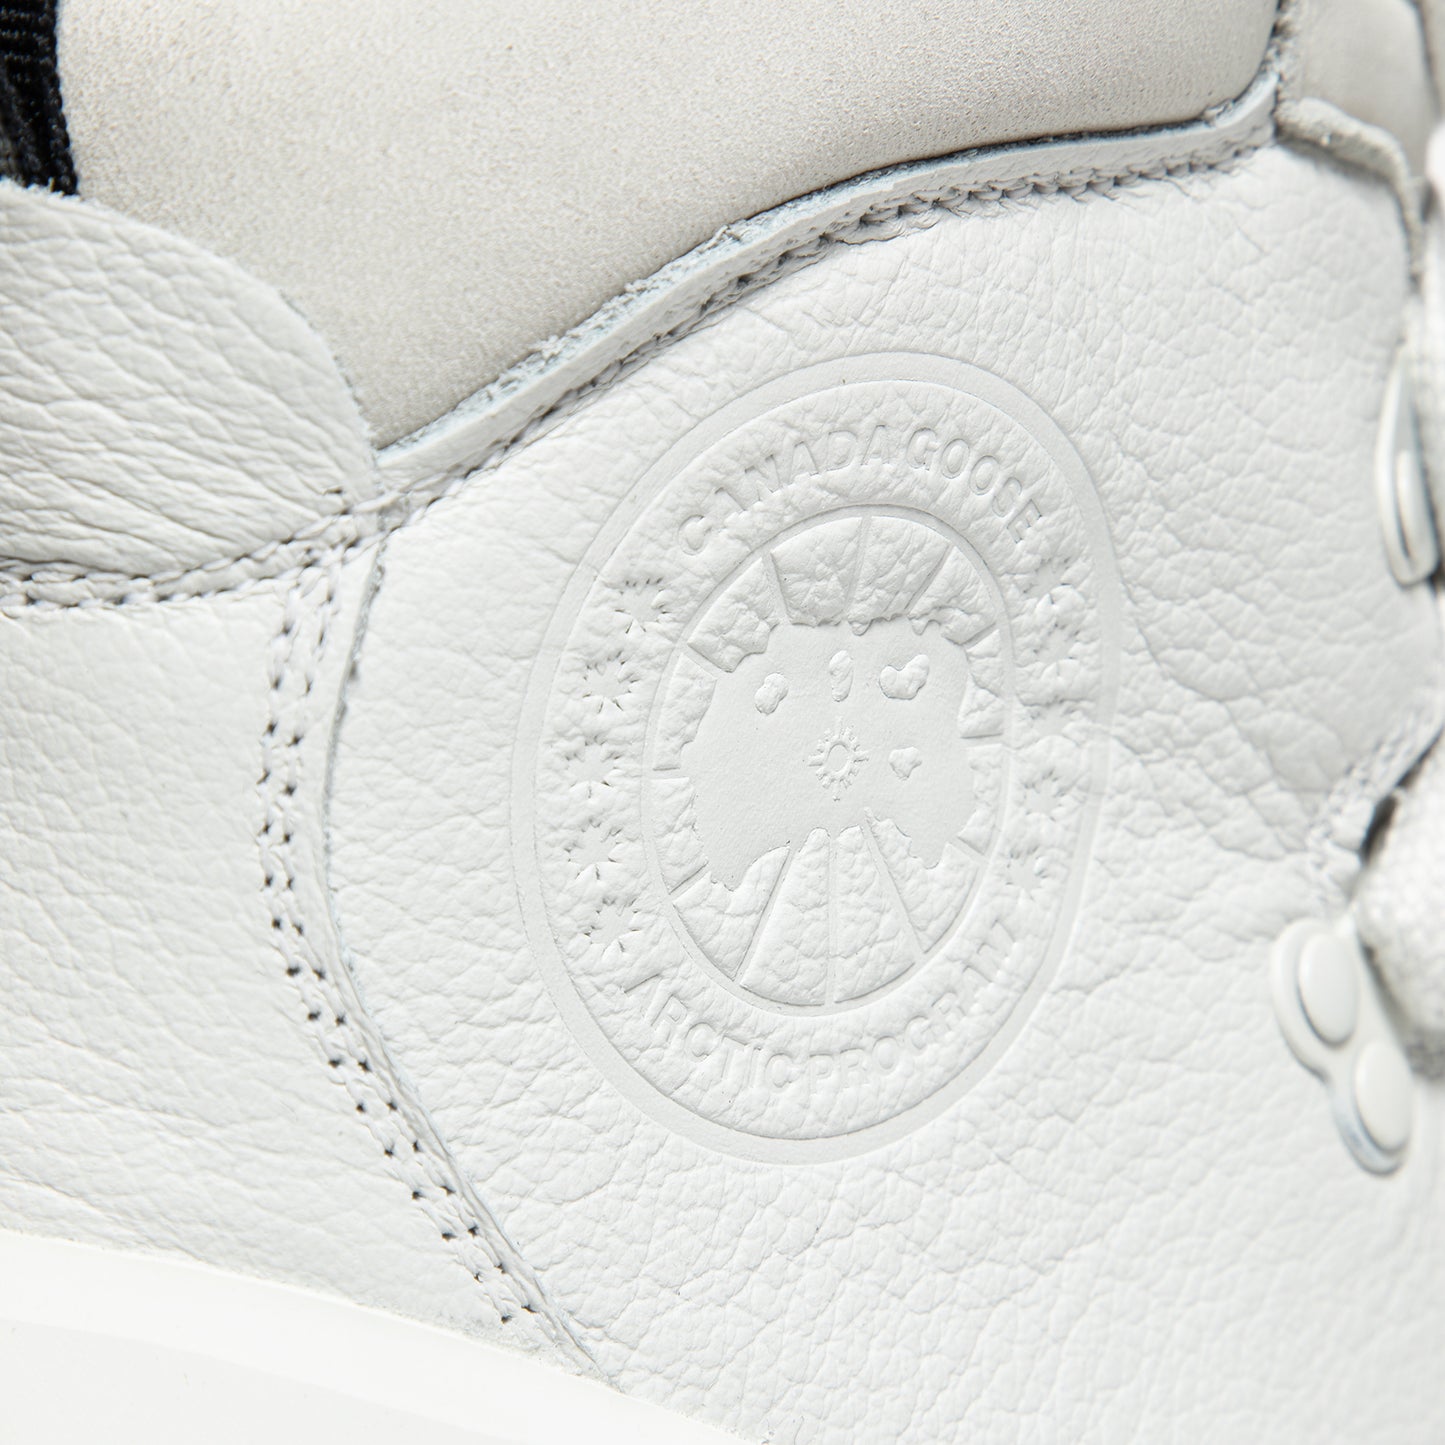 Canada Goose Journey Boot (White)